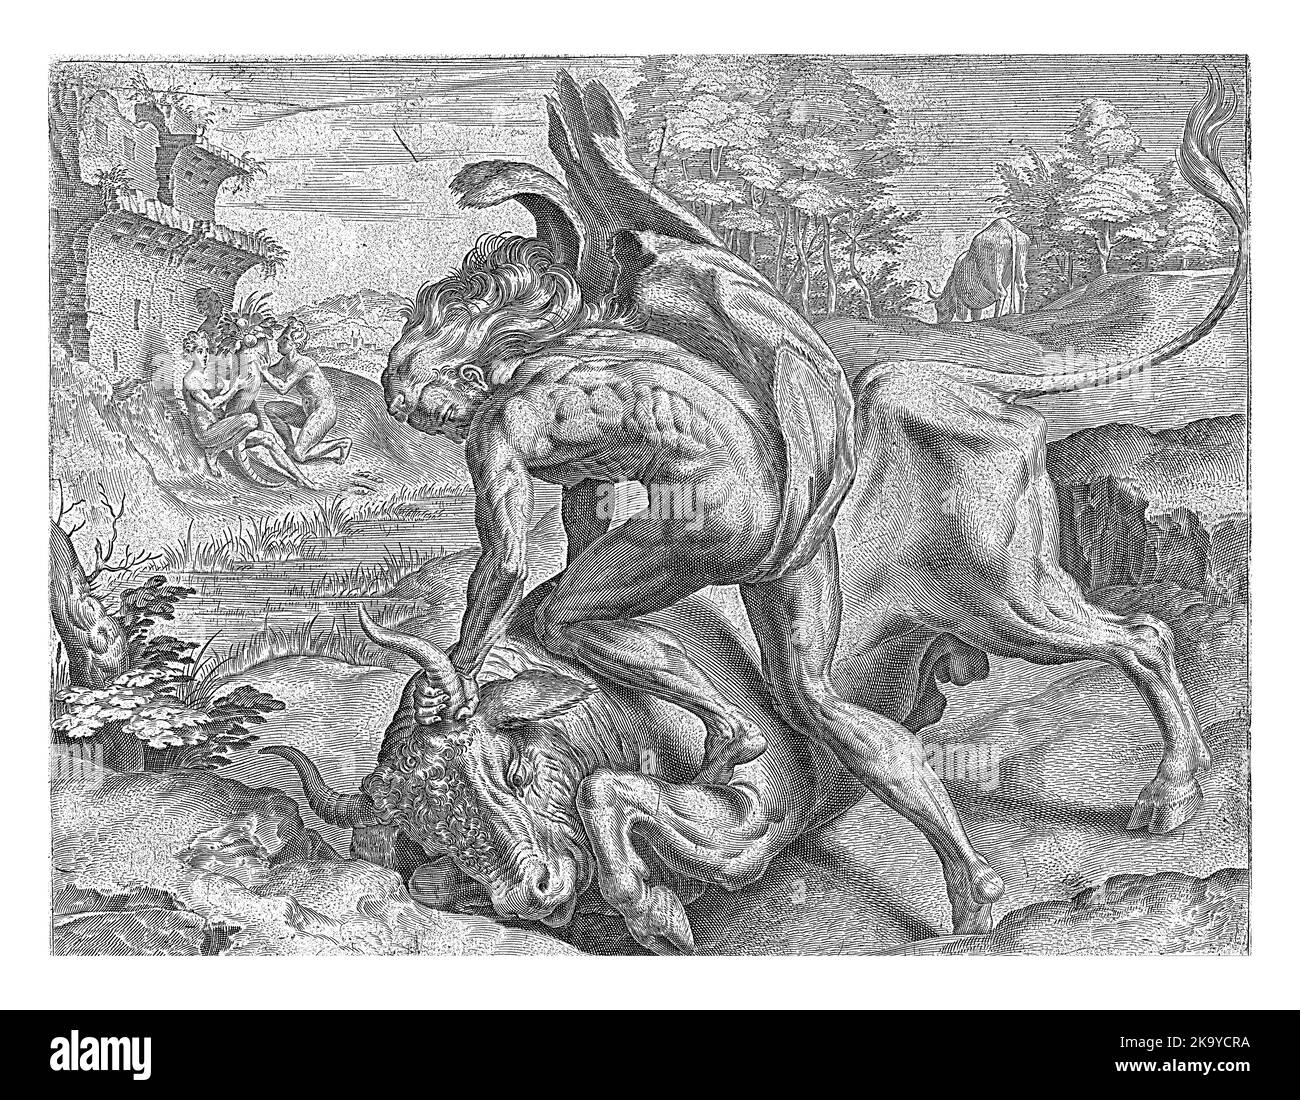 Hercules wrestles with Achelous, Cornelis Cort, after Frans Floris (I), in or after 1563 - before 1595 Hercules fights with the river god AcheloÃ¼s, w Stock Photo